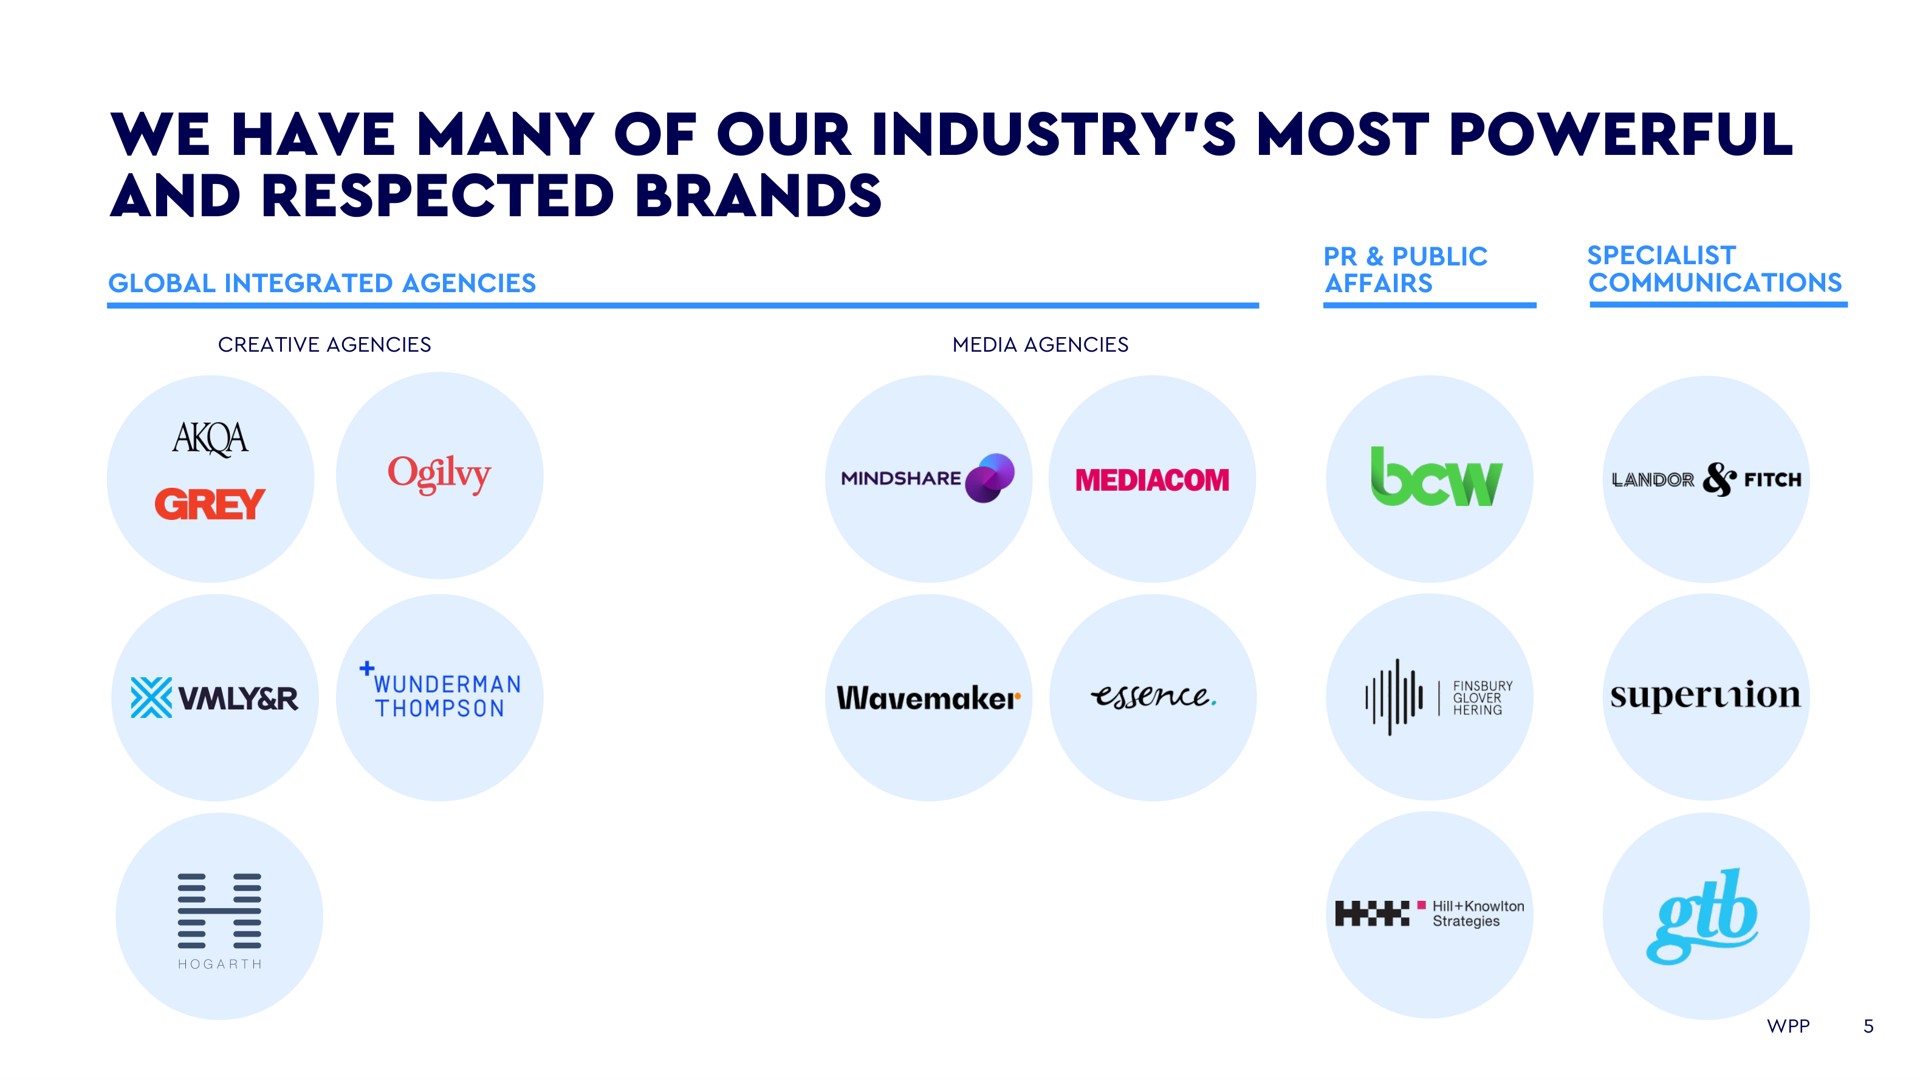 we have many of our industry most powerful and respected brands | WPP